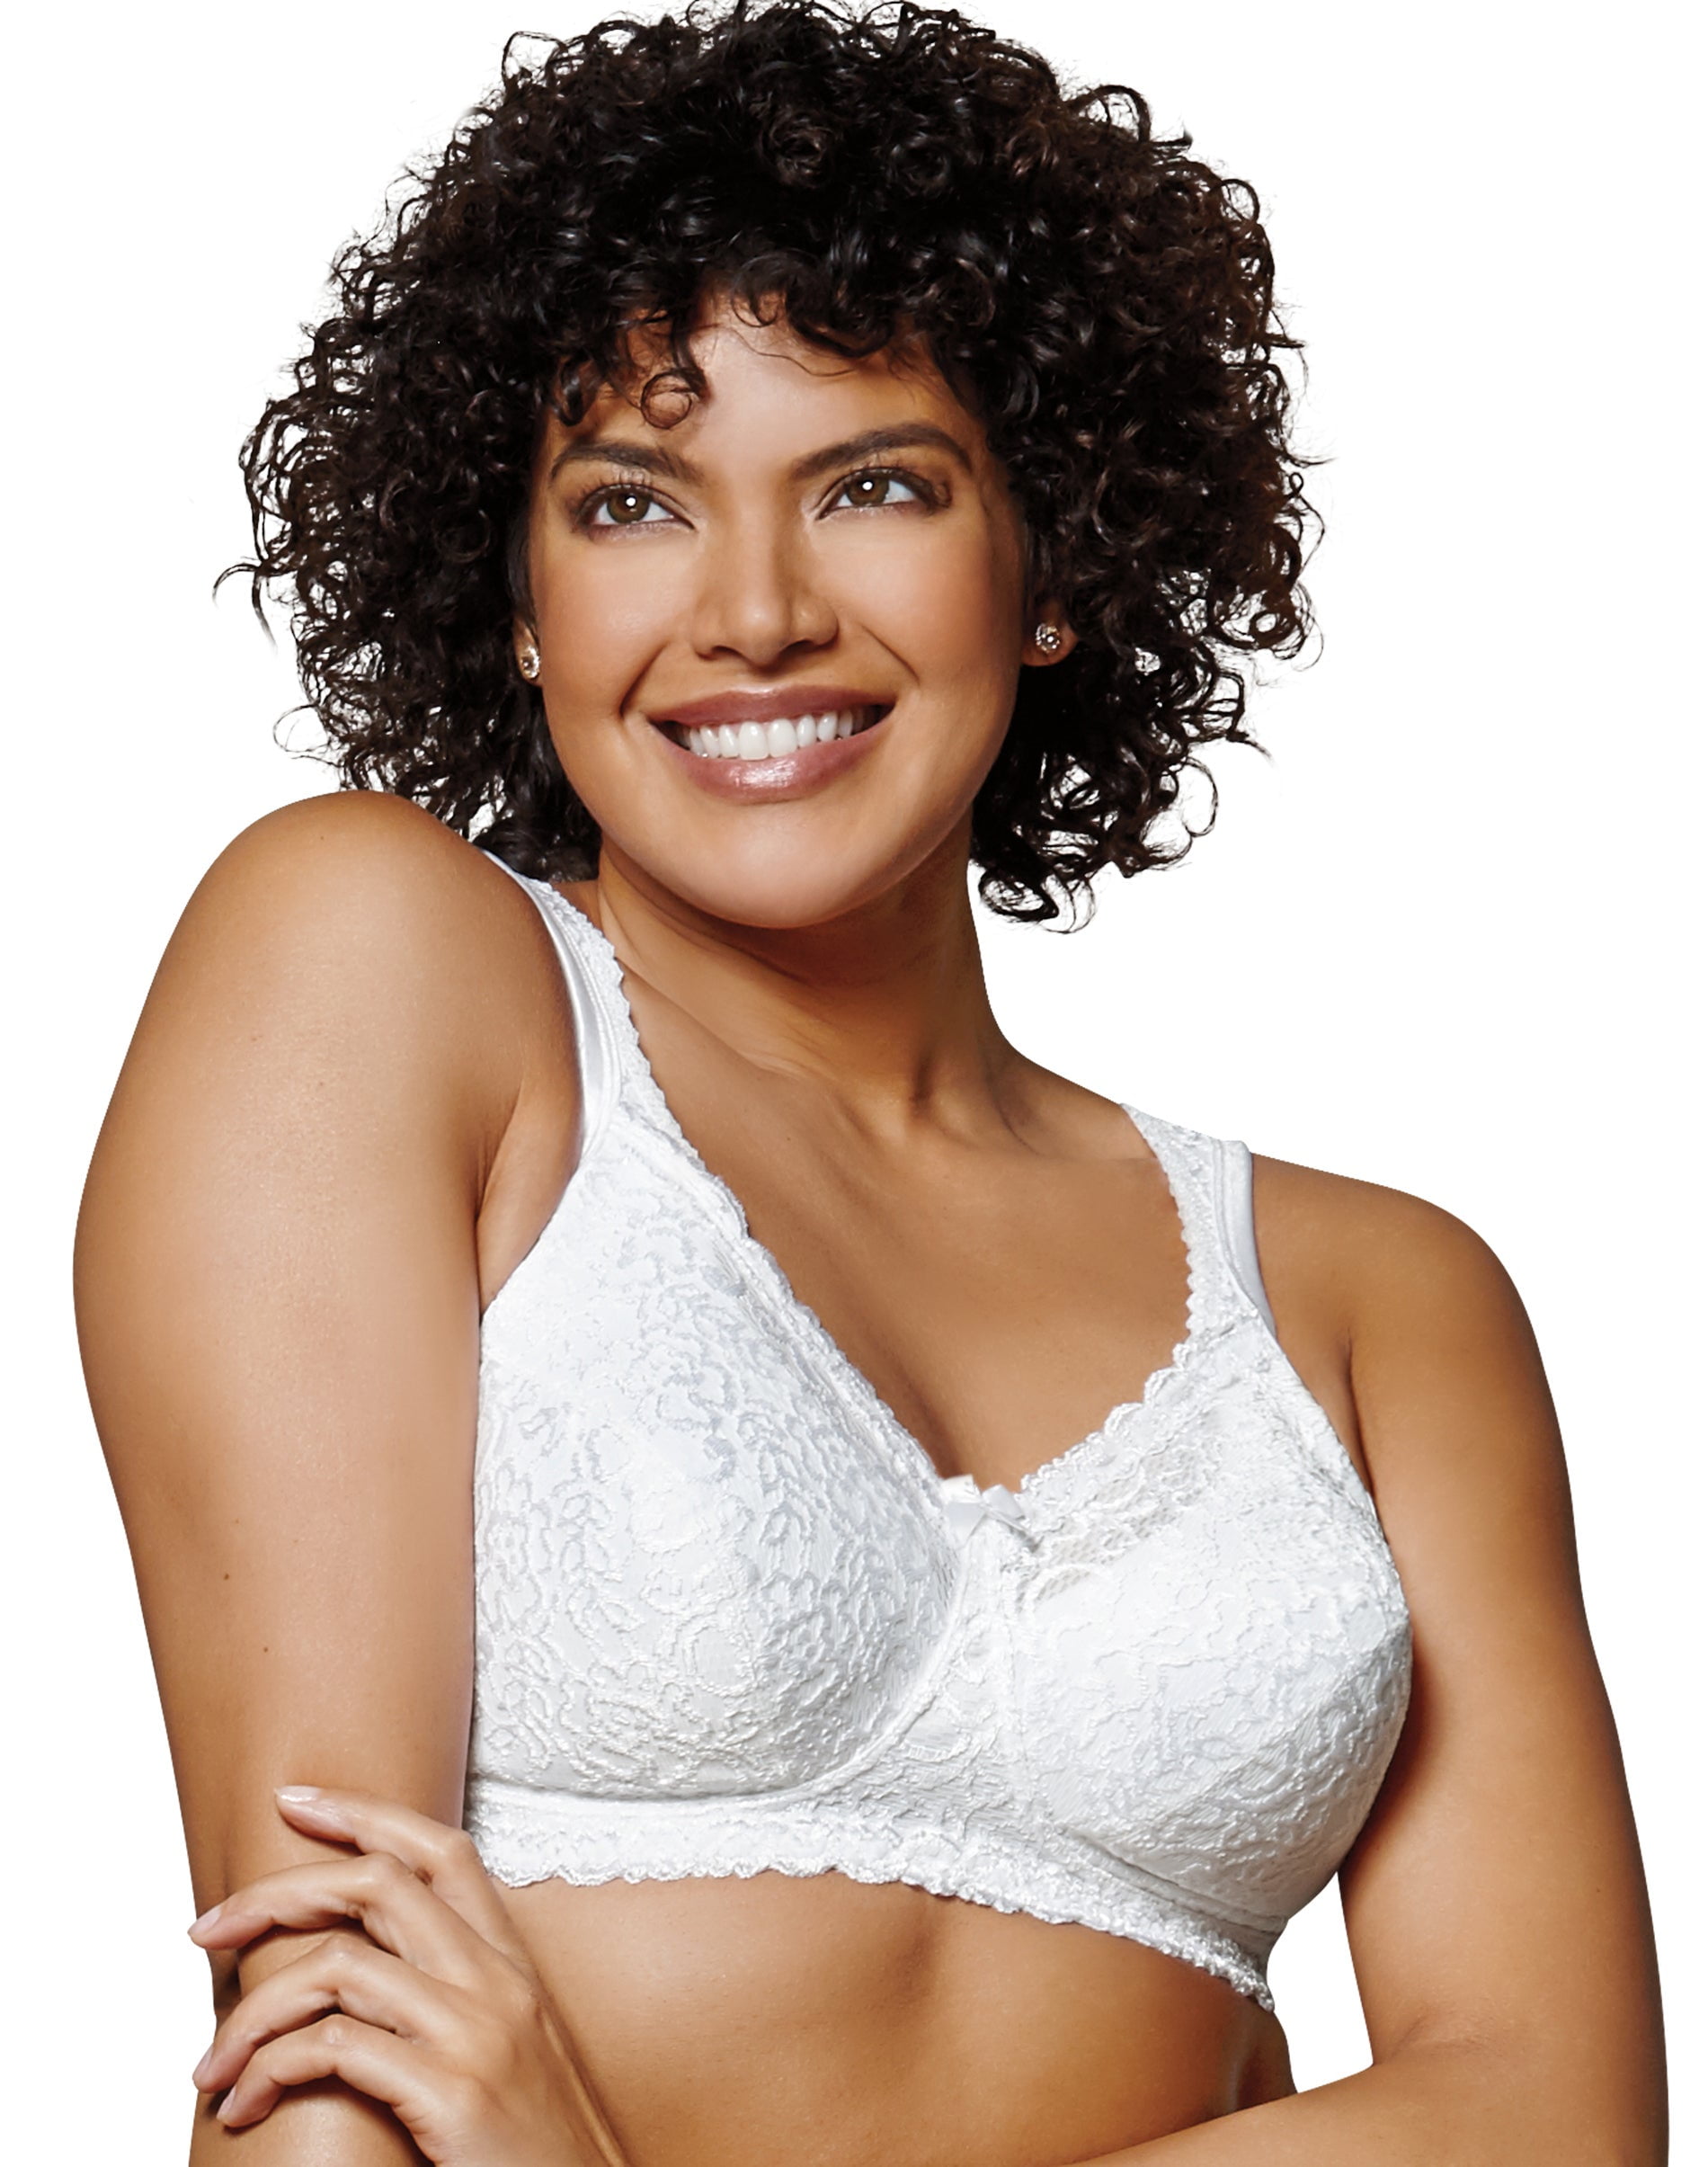 Playtex Women's 18 Hour Breathable Comfort Wireless Bra US4090 at   Women's Clothing store: Bras